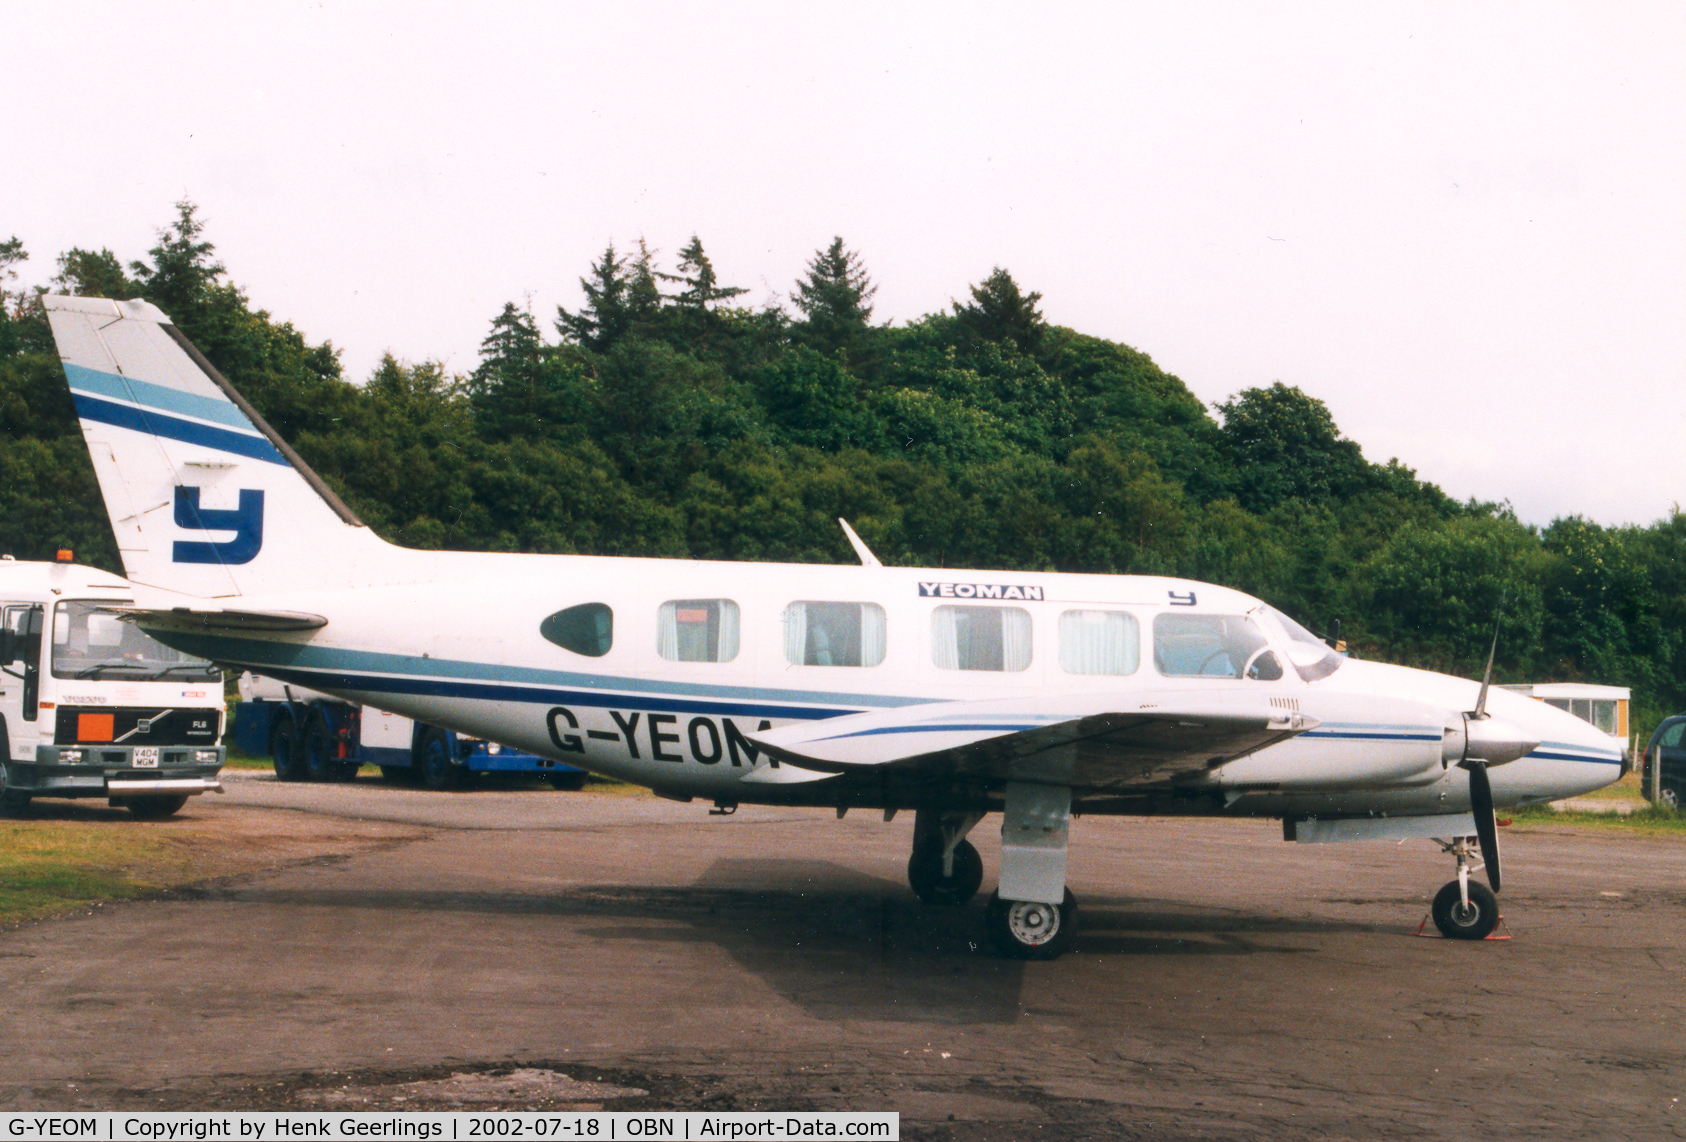 G-YEOM, 1983 Piper PA-31-350 Chieftain C/N 31-8352022, Oban Airport Scotland ,
Foster Yeoman .